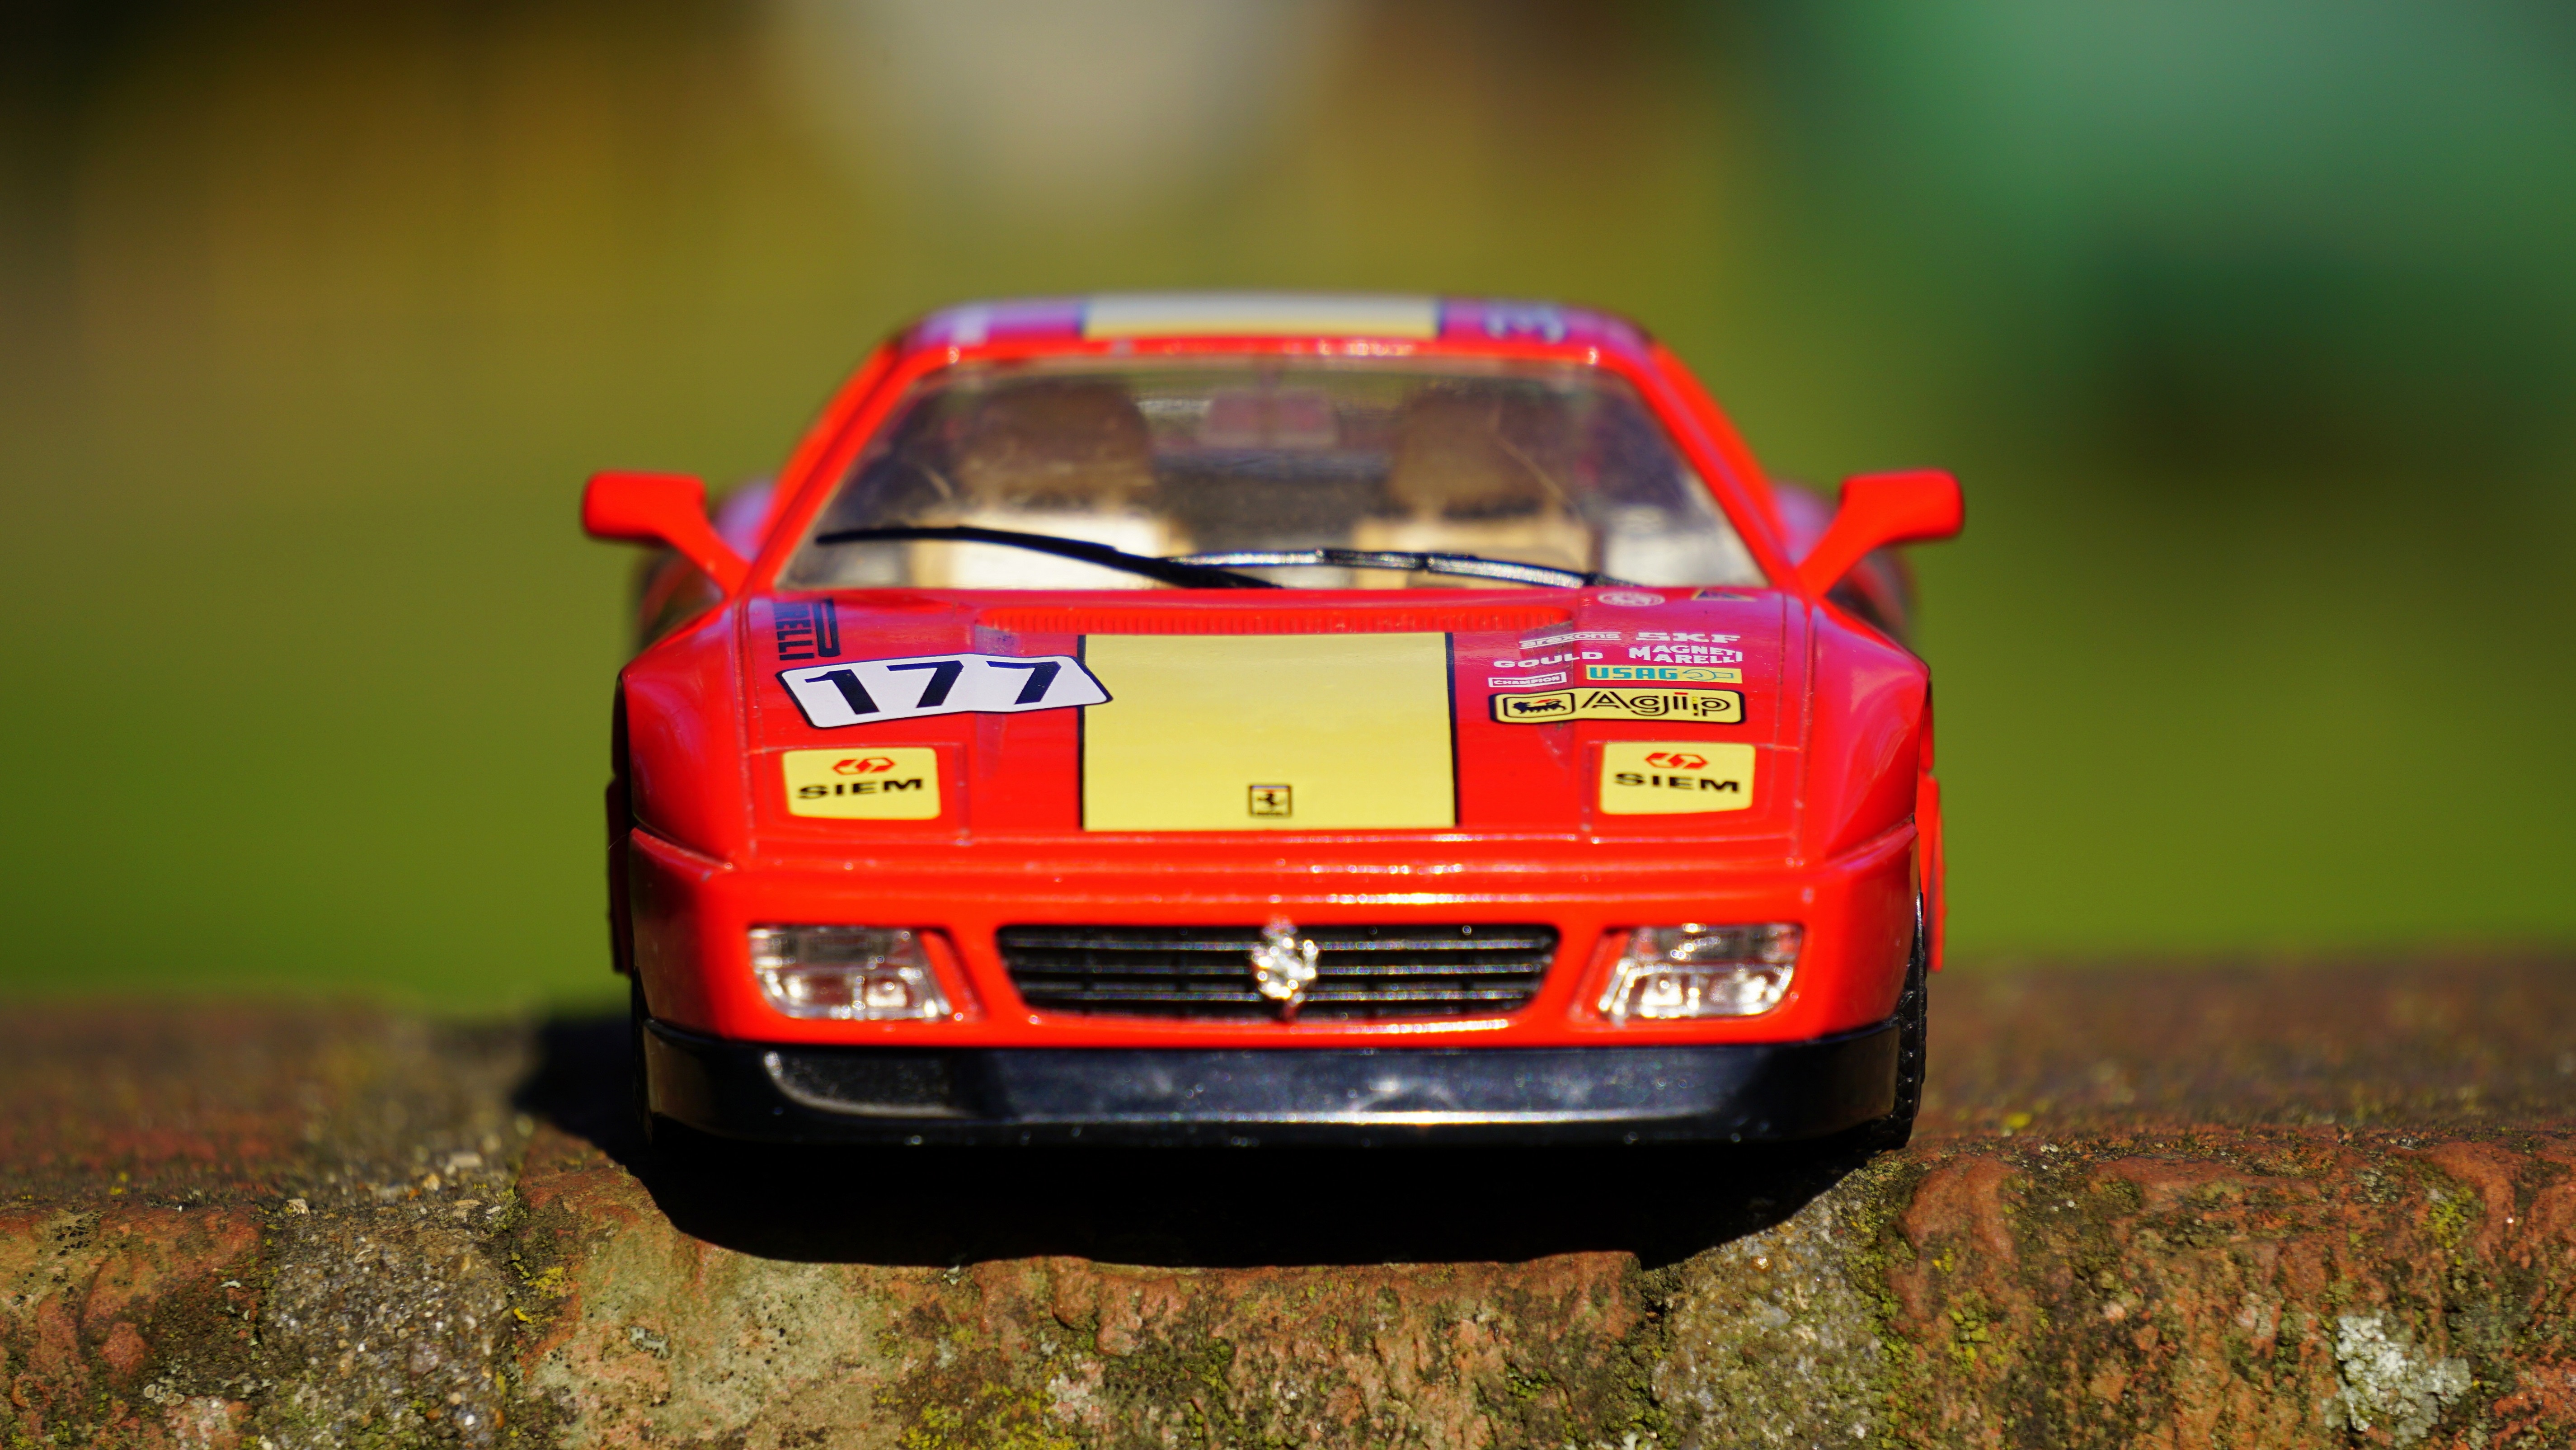 red and black race car die-cast model